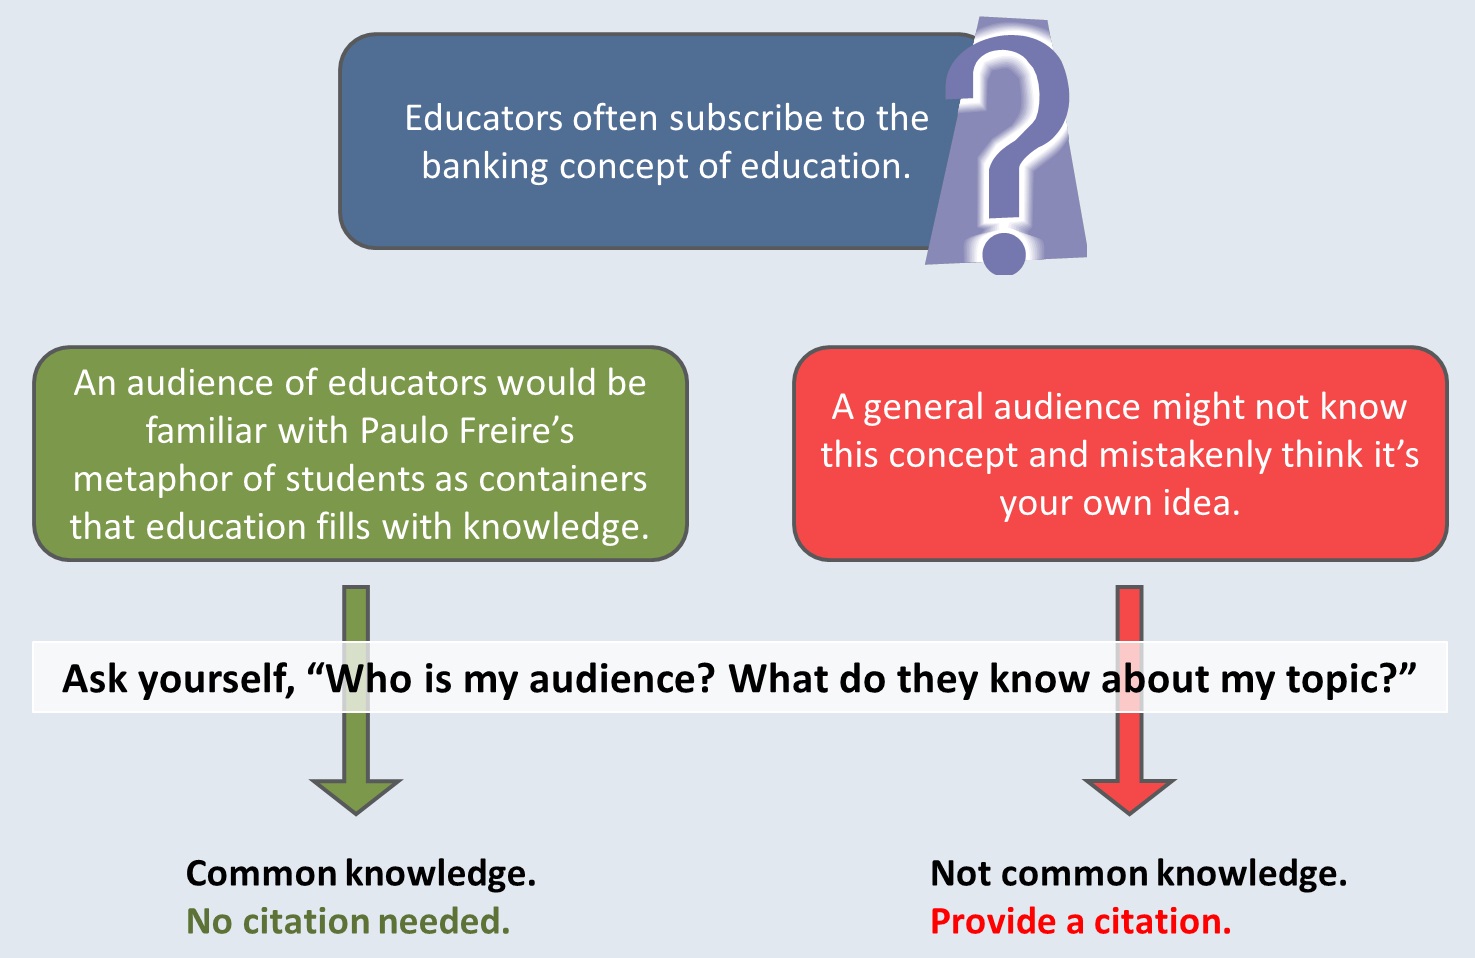 Example sentence. Educators often subscribe to the banking concept of education. Analysis. To determine if this sentence is common knowledge, ask yourself, “Who is my audience? What do they know about my topic?” If your audience is educators who are familiar with Paulo Freire’s metaphor of students as containers that education fills with knowledge, then this statement counts as common knowledge and no citation is needed. If your audience is a general audience that might not know this concept and may mistakenly think it’s your own idea, then this statement is not common knowledge and you should provide a citation.